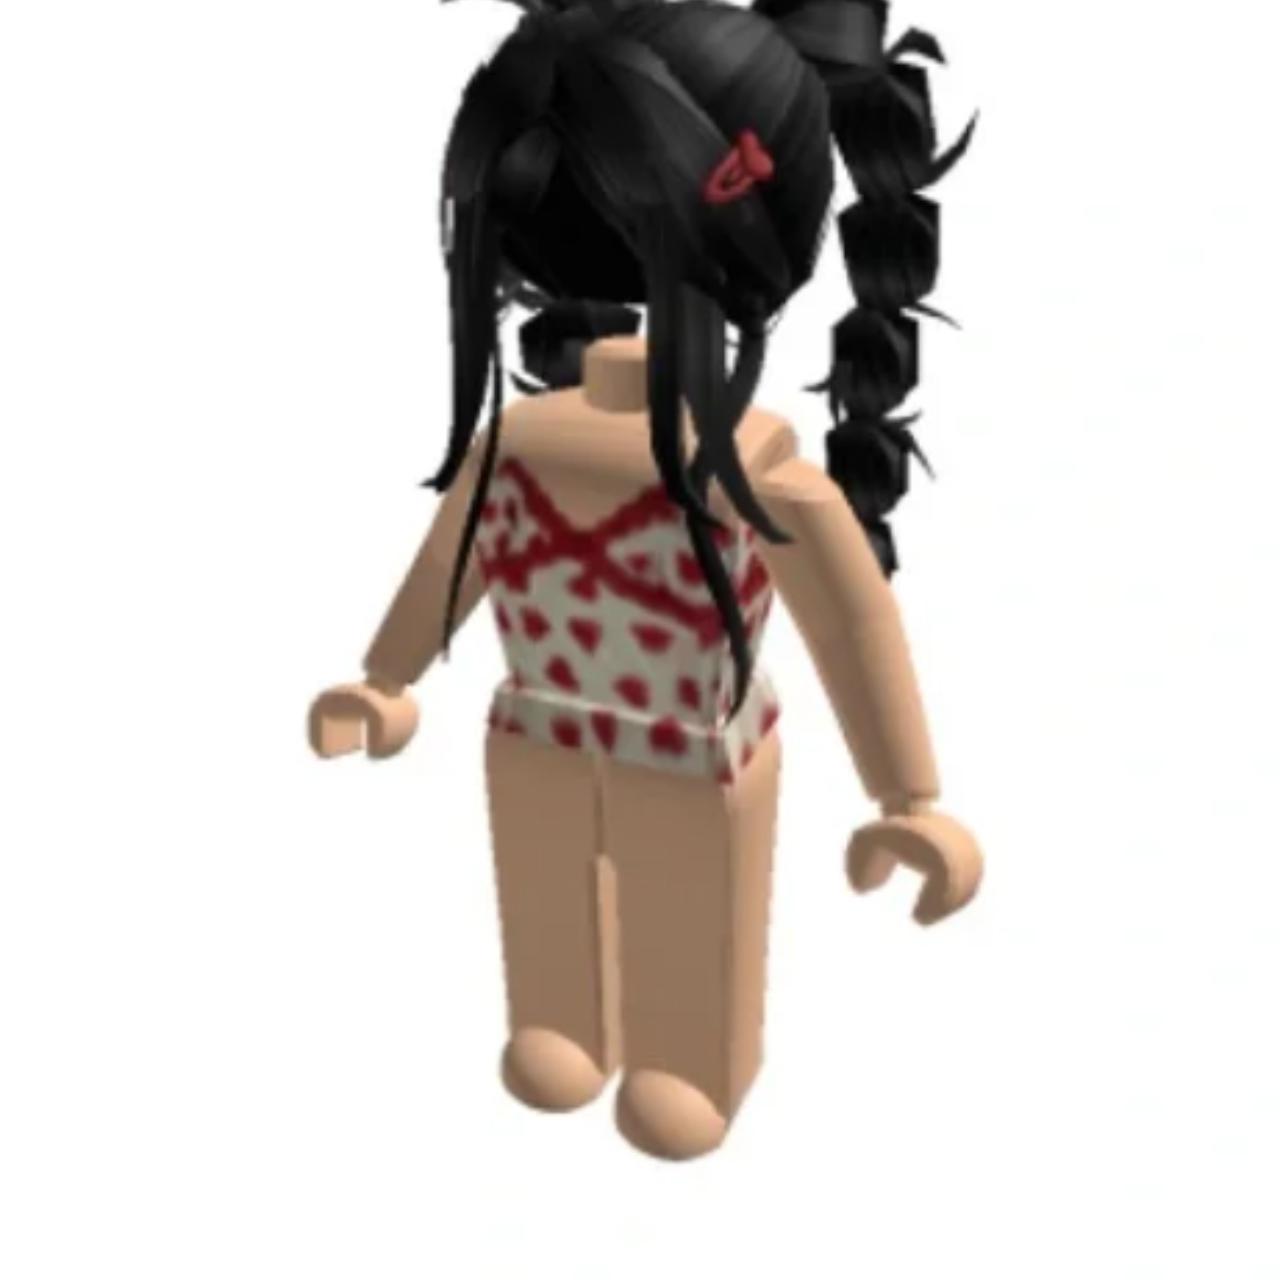 Roblox account w/ Headless for sale!!!, 45+